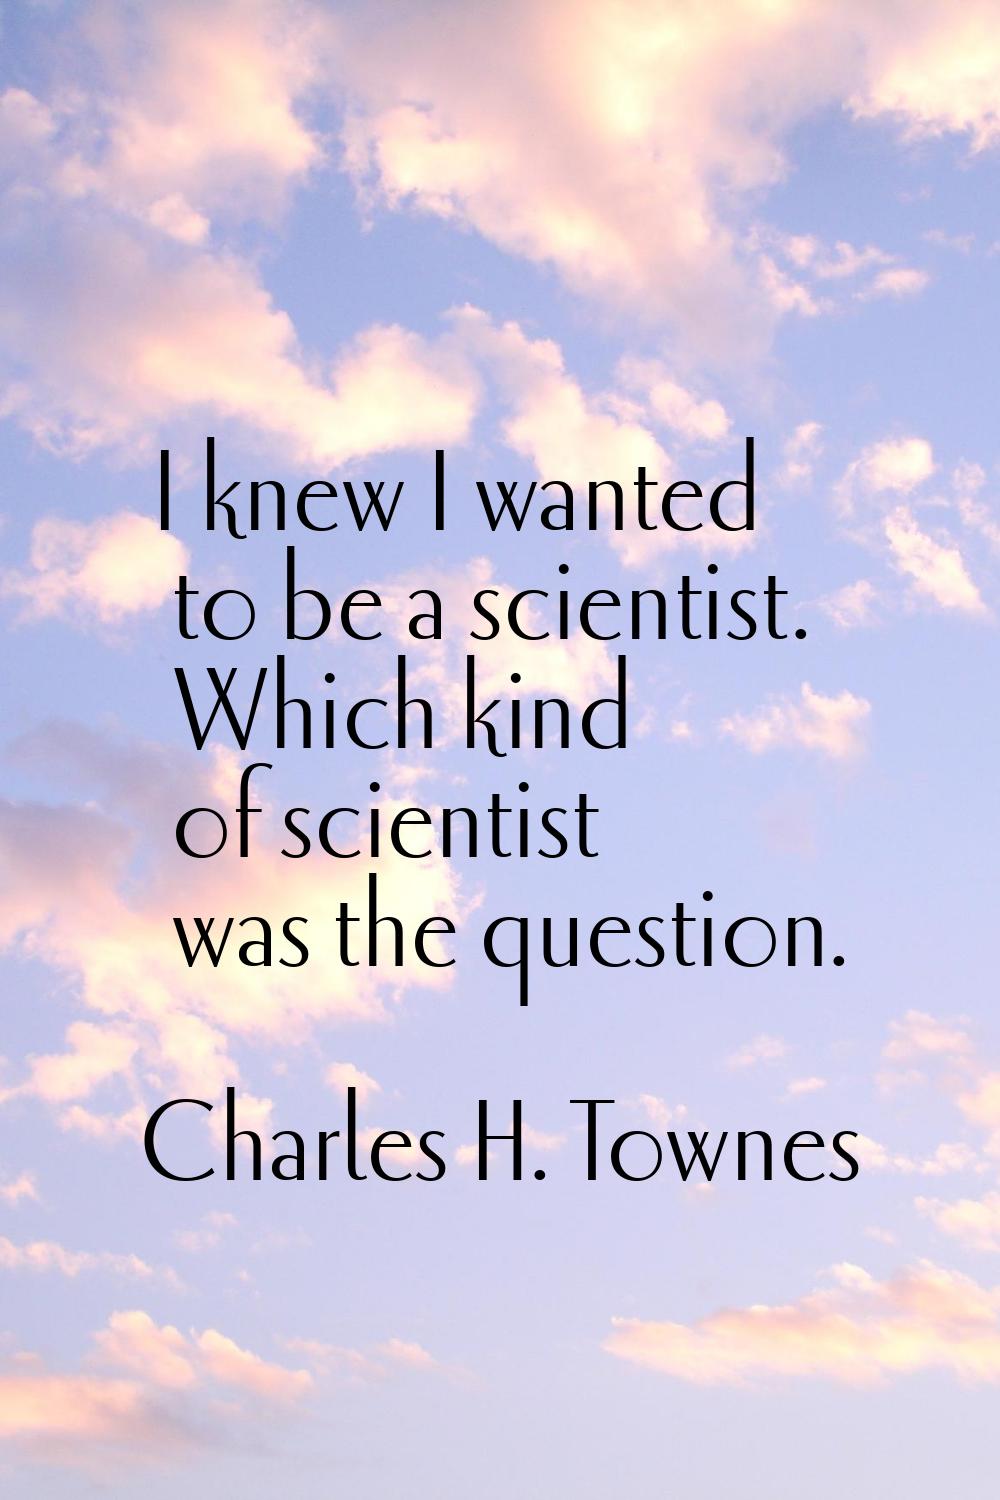 I knew I wanted to be a scientist. Which kind of scientist was the question.